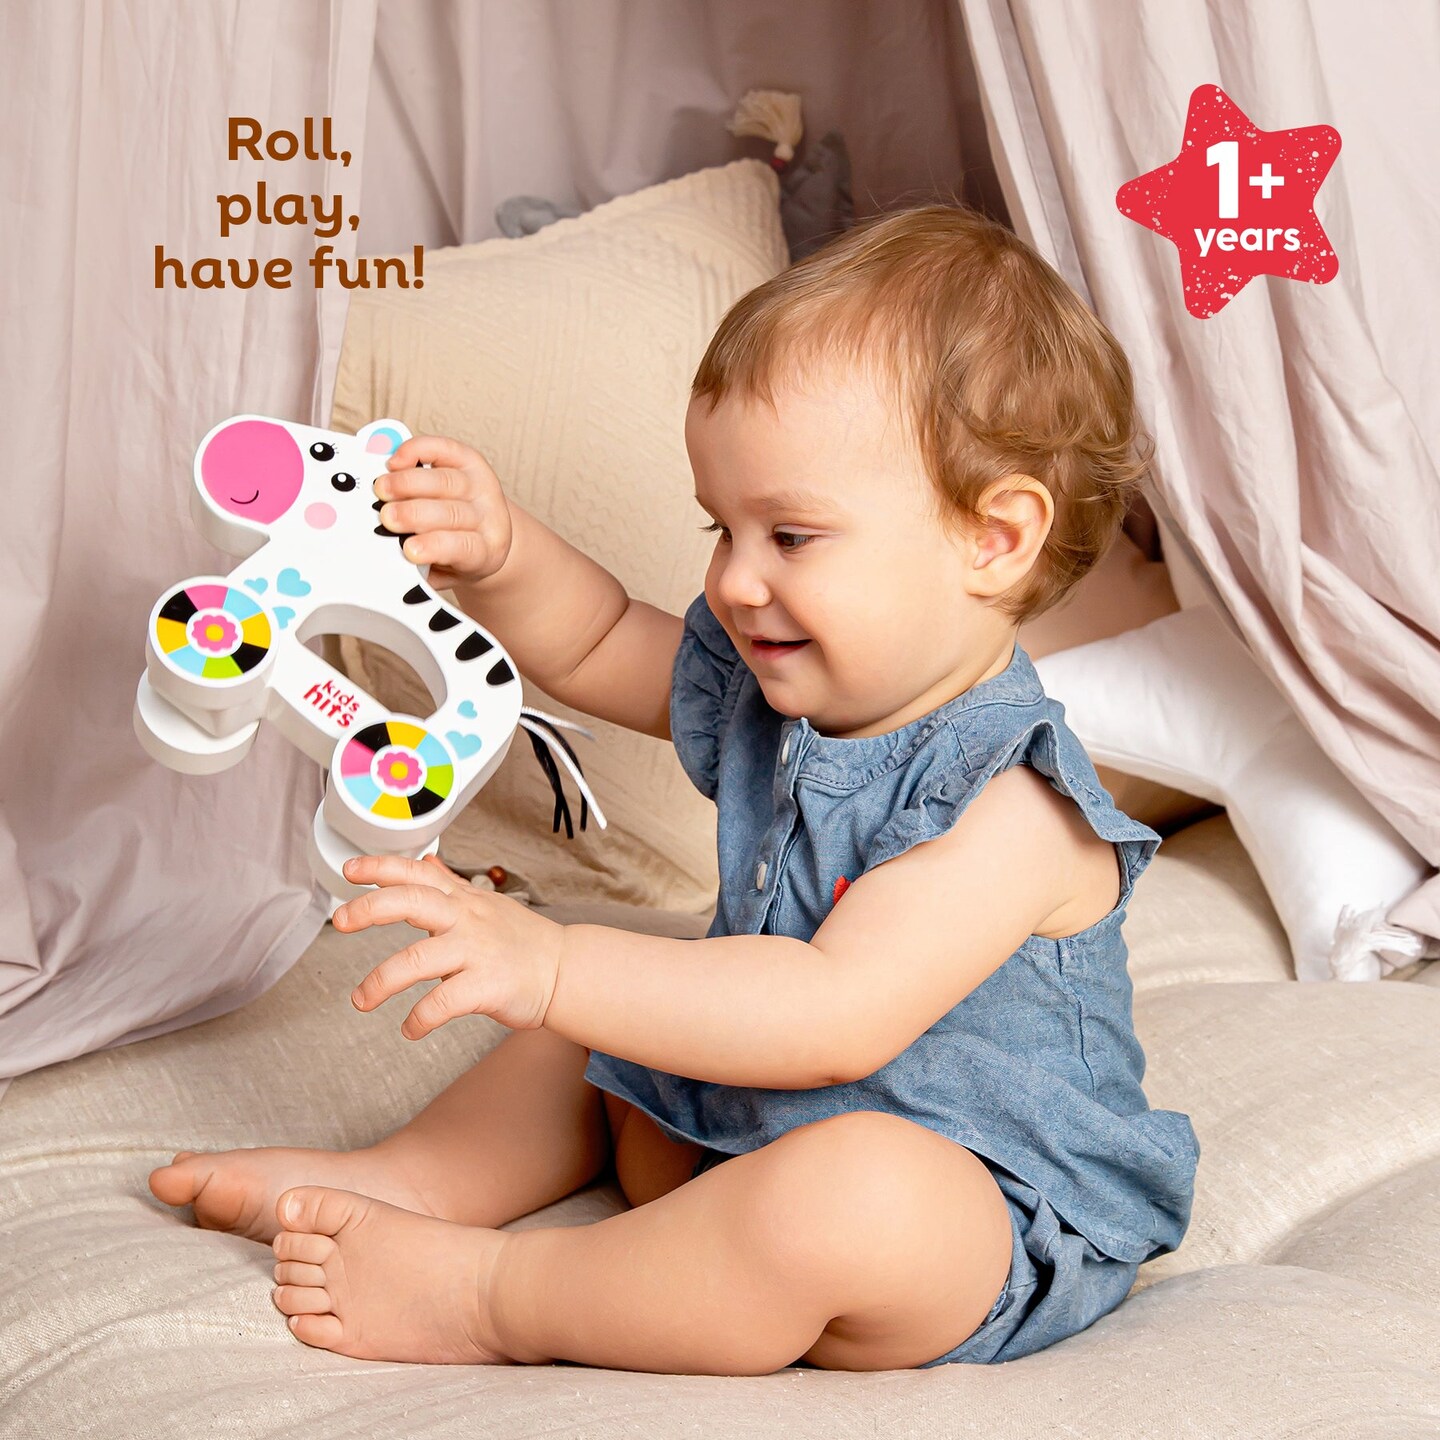 Kids Hits: Colorful Wooden Push &#x26; Pull Toy Pull-Along Zebra - A Fun Companion for Toddler Exploration!